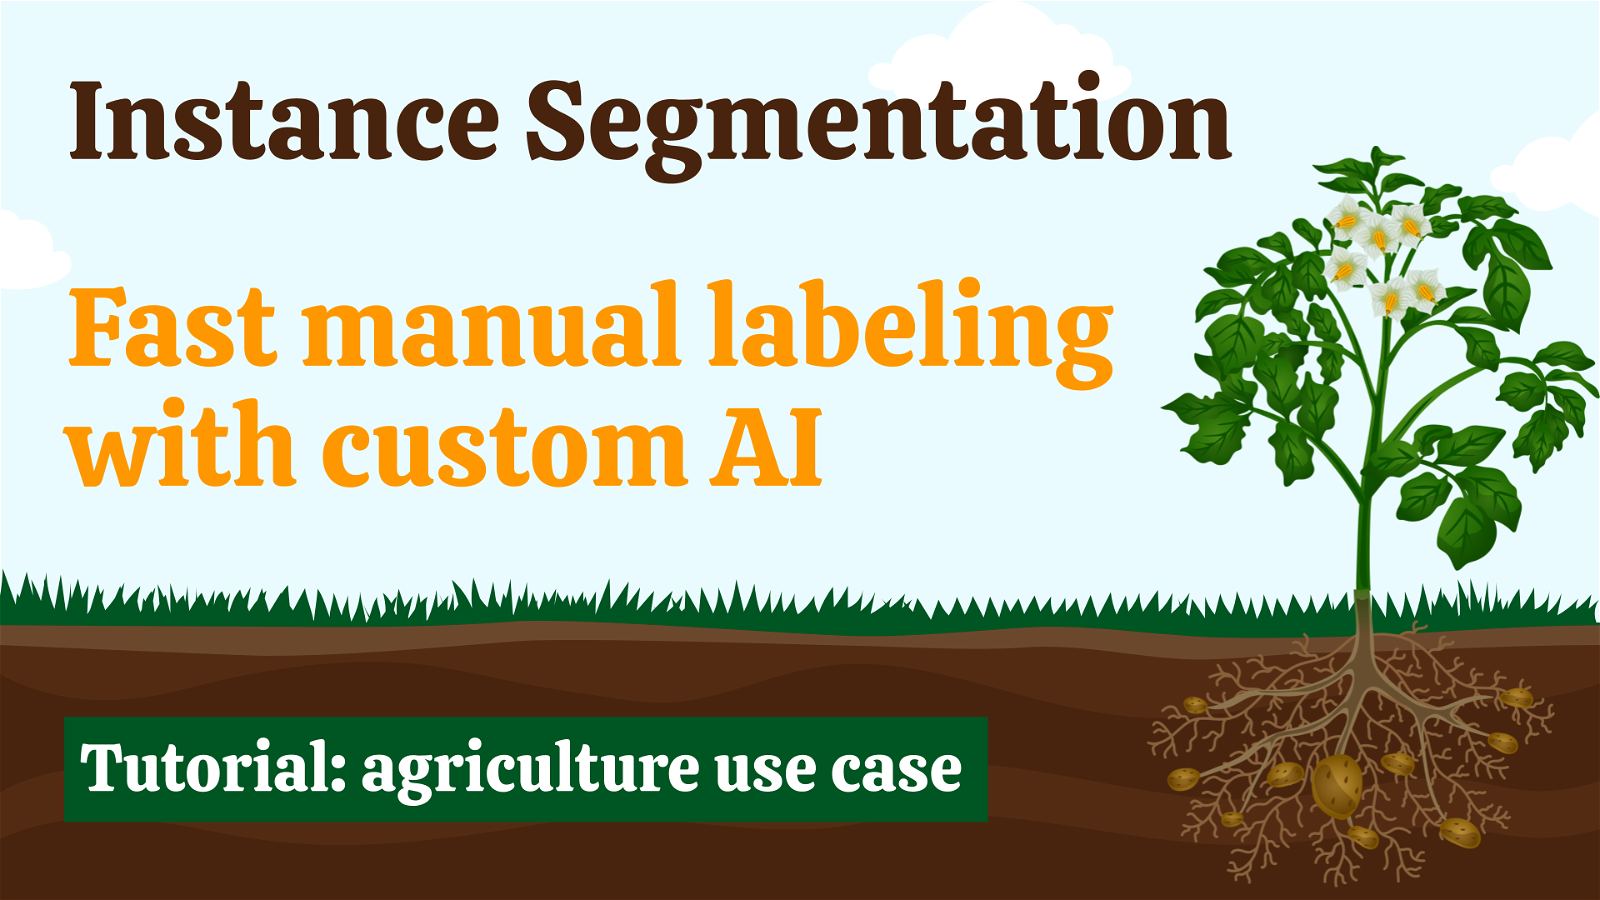 Guide to Training Custom Interactive Instance Segmentation Model for Agricultural Images